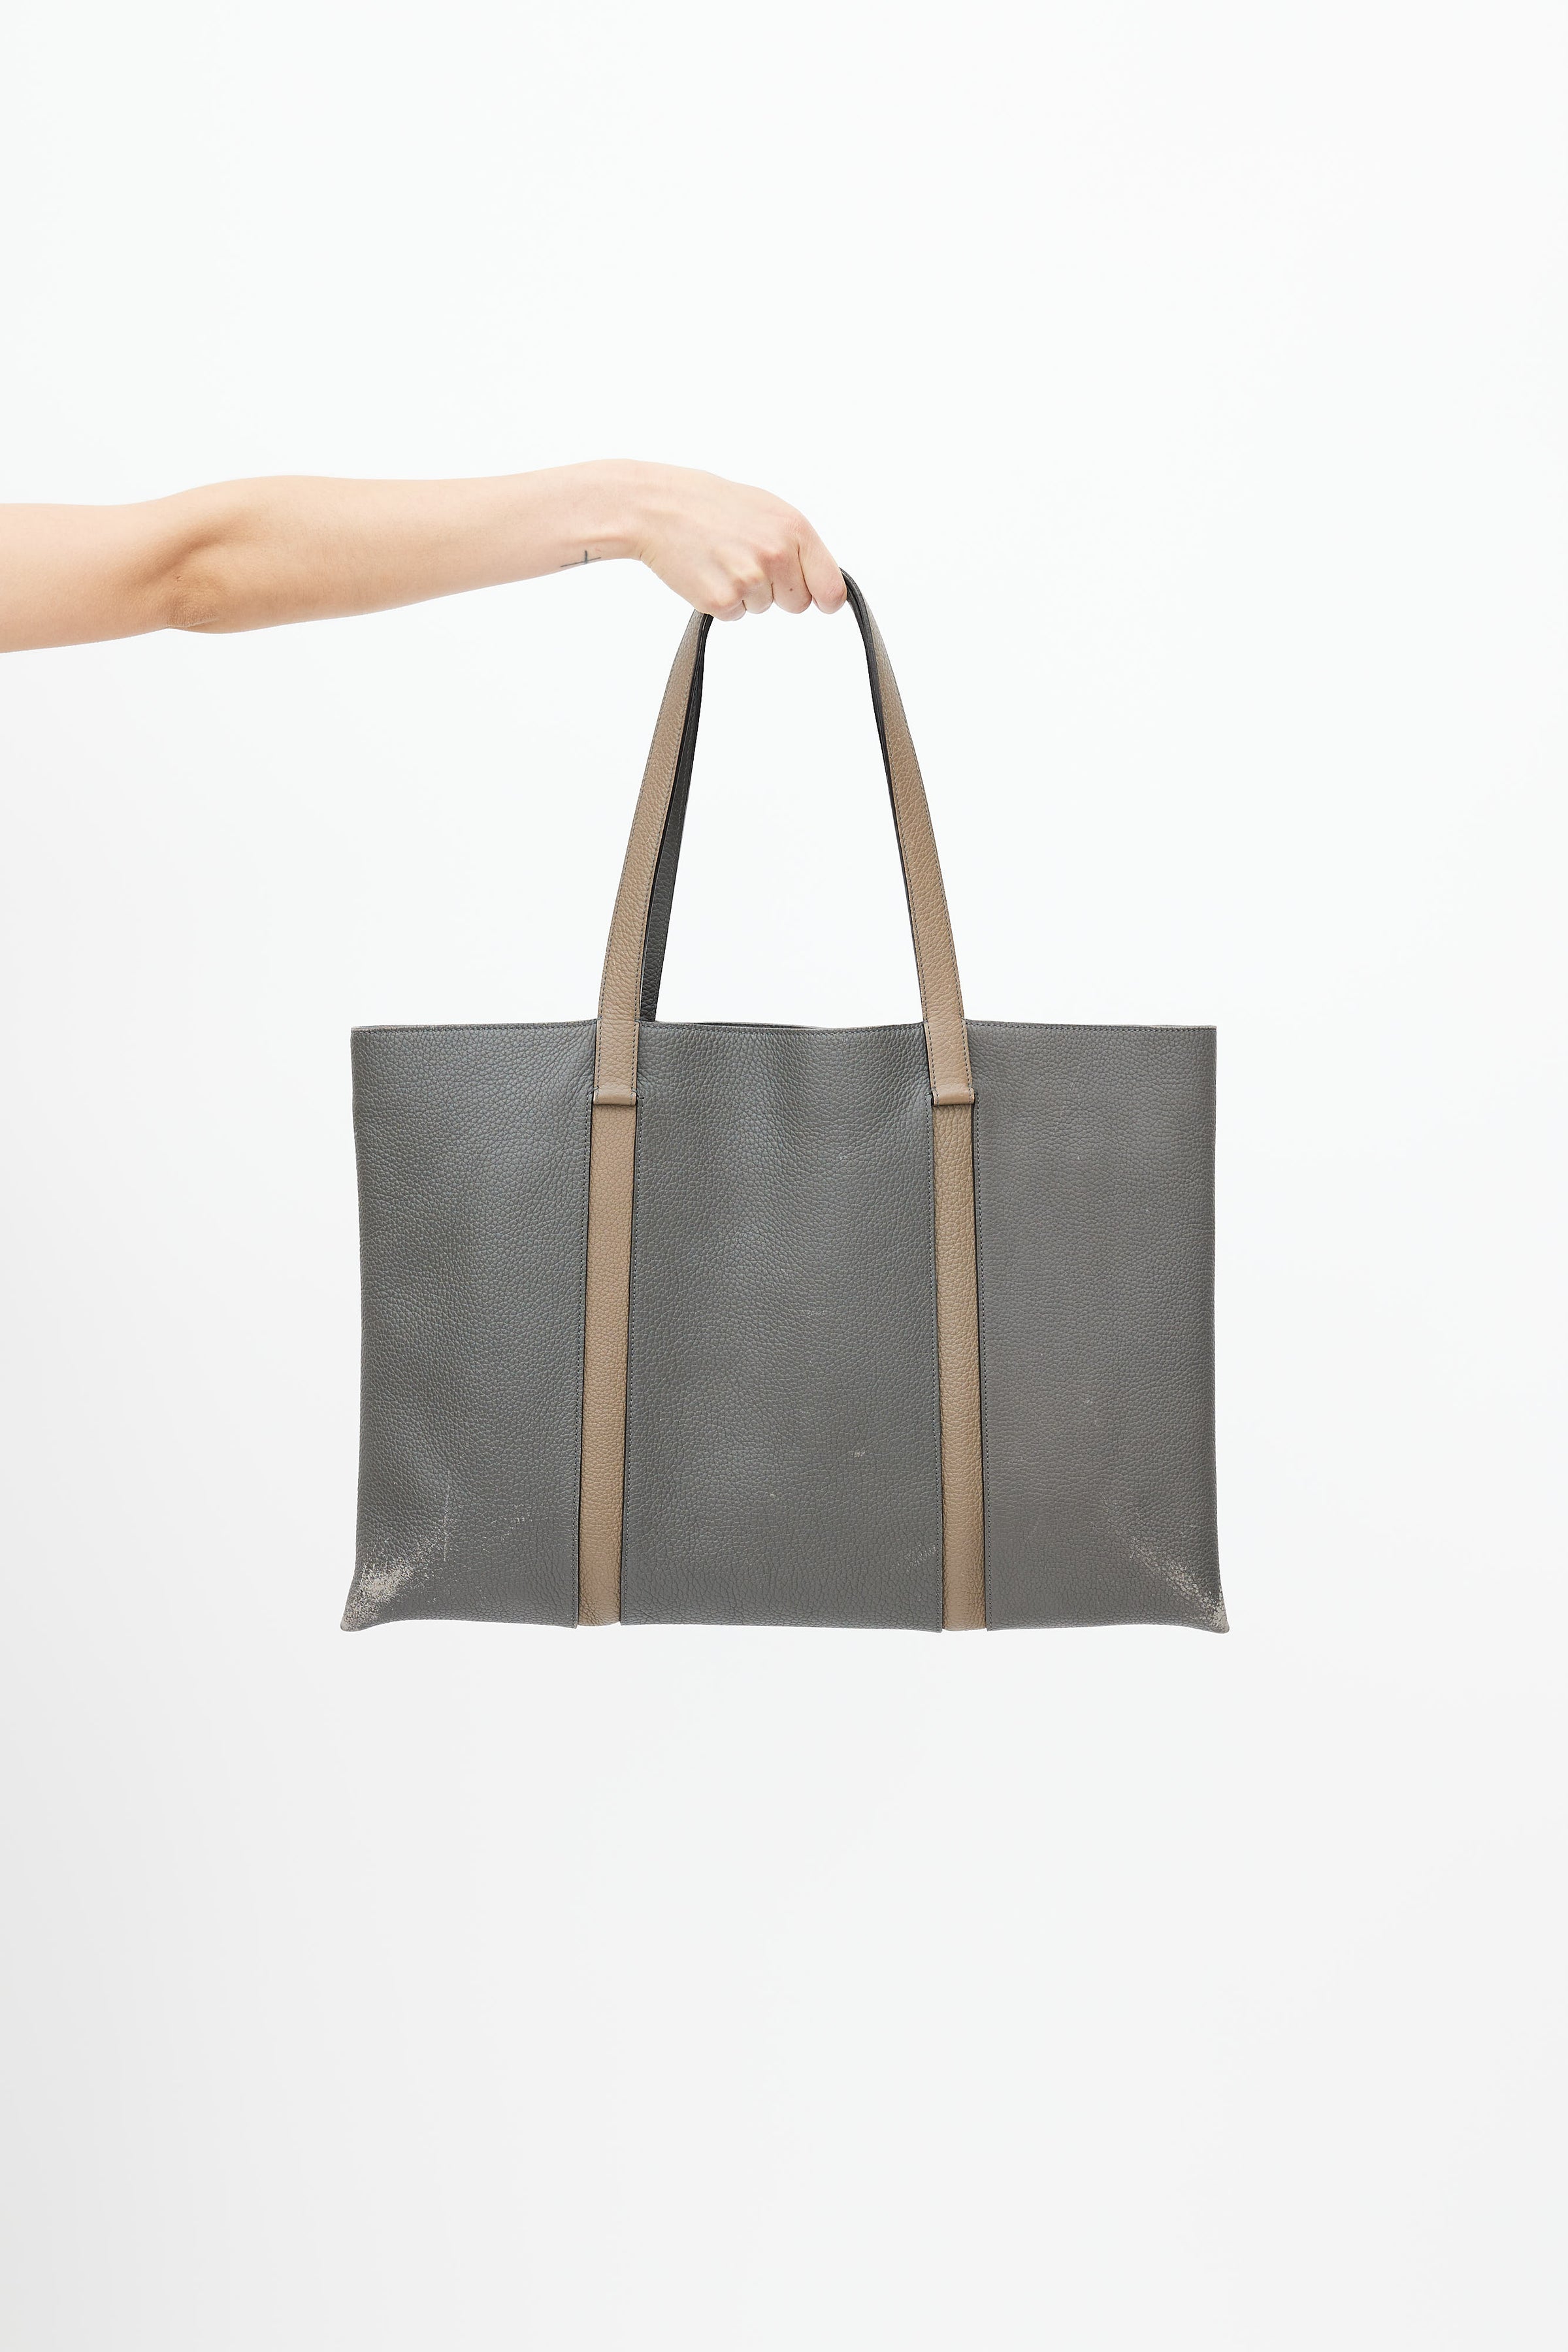 Moynat Grey Grained Leather Tote